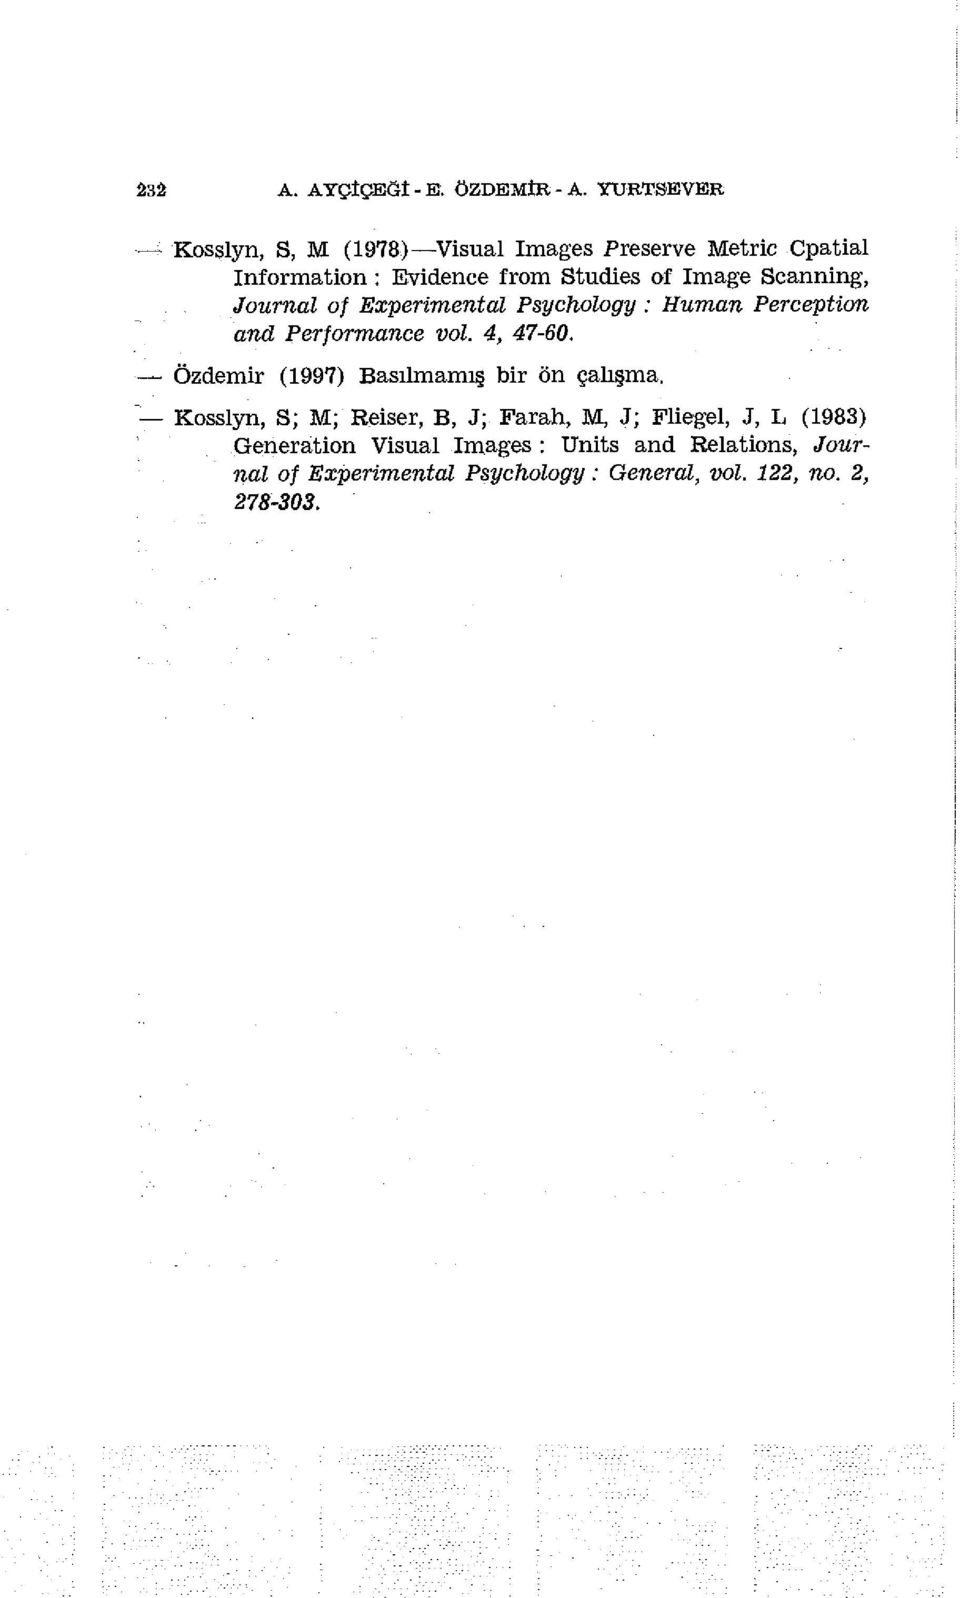 Scanning, Journal of Experimental Psychology : Human Perception and Performance vol.